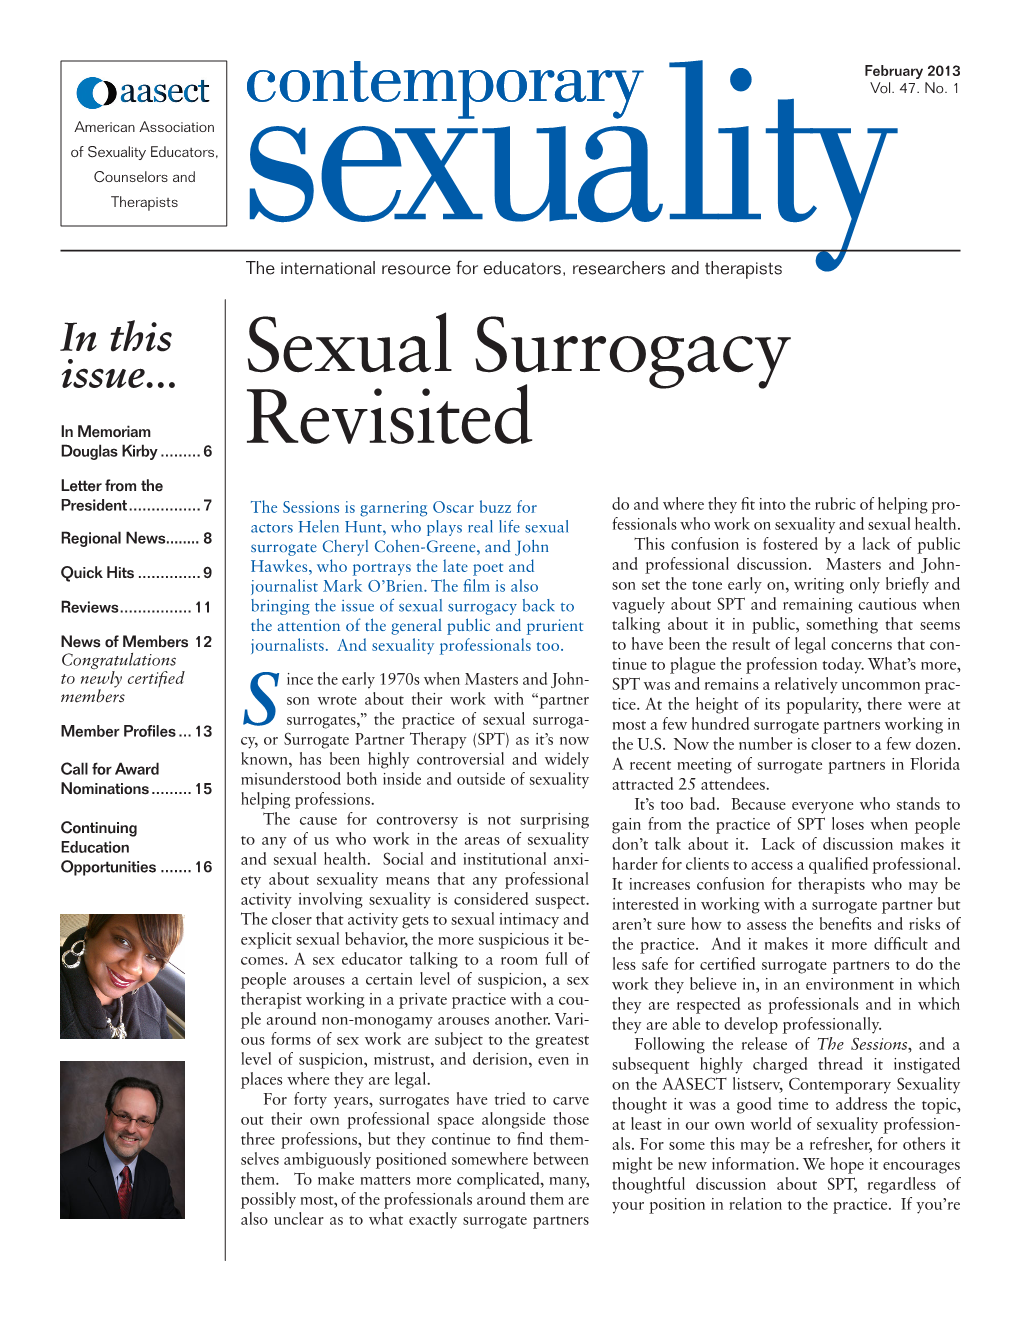 Sexual Surrogacy Revisited